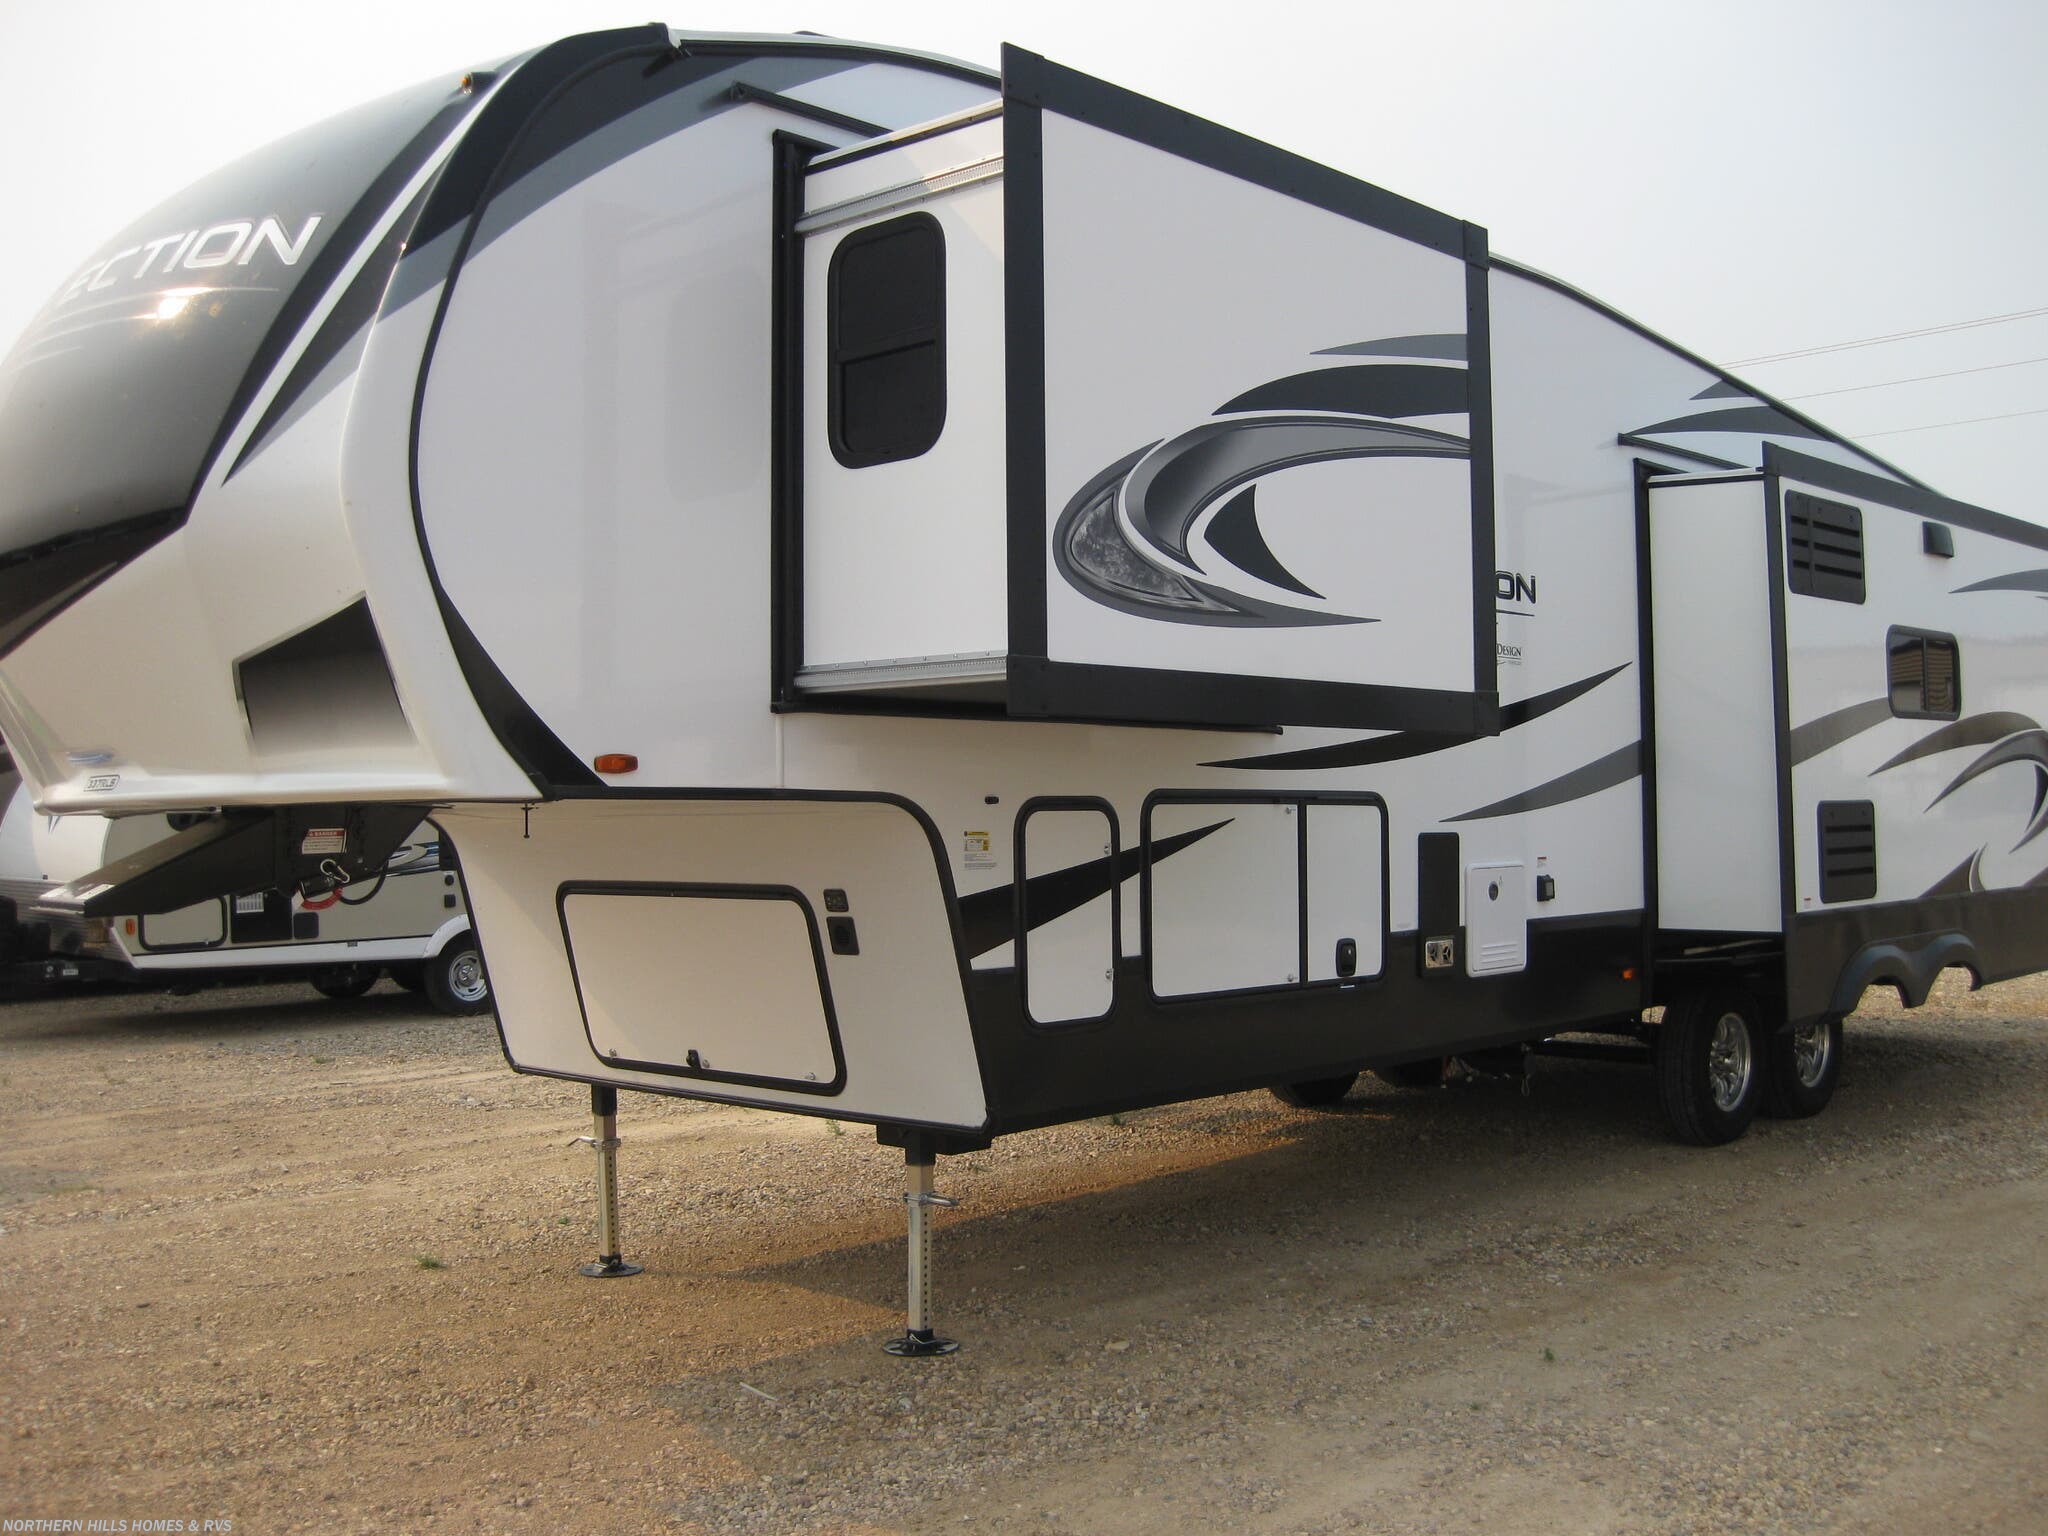 2023 Grand Design Reflection 337RLS RV for Sale in Whitewood, SD 57793